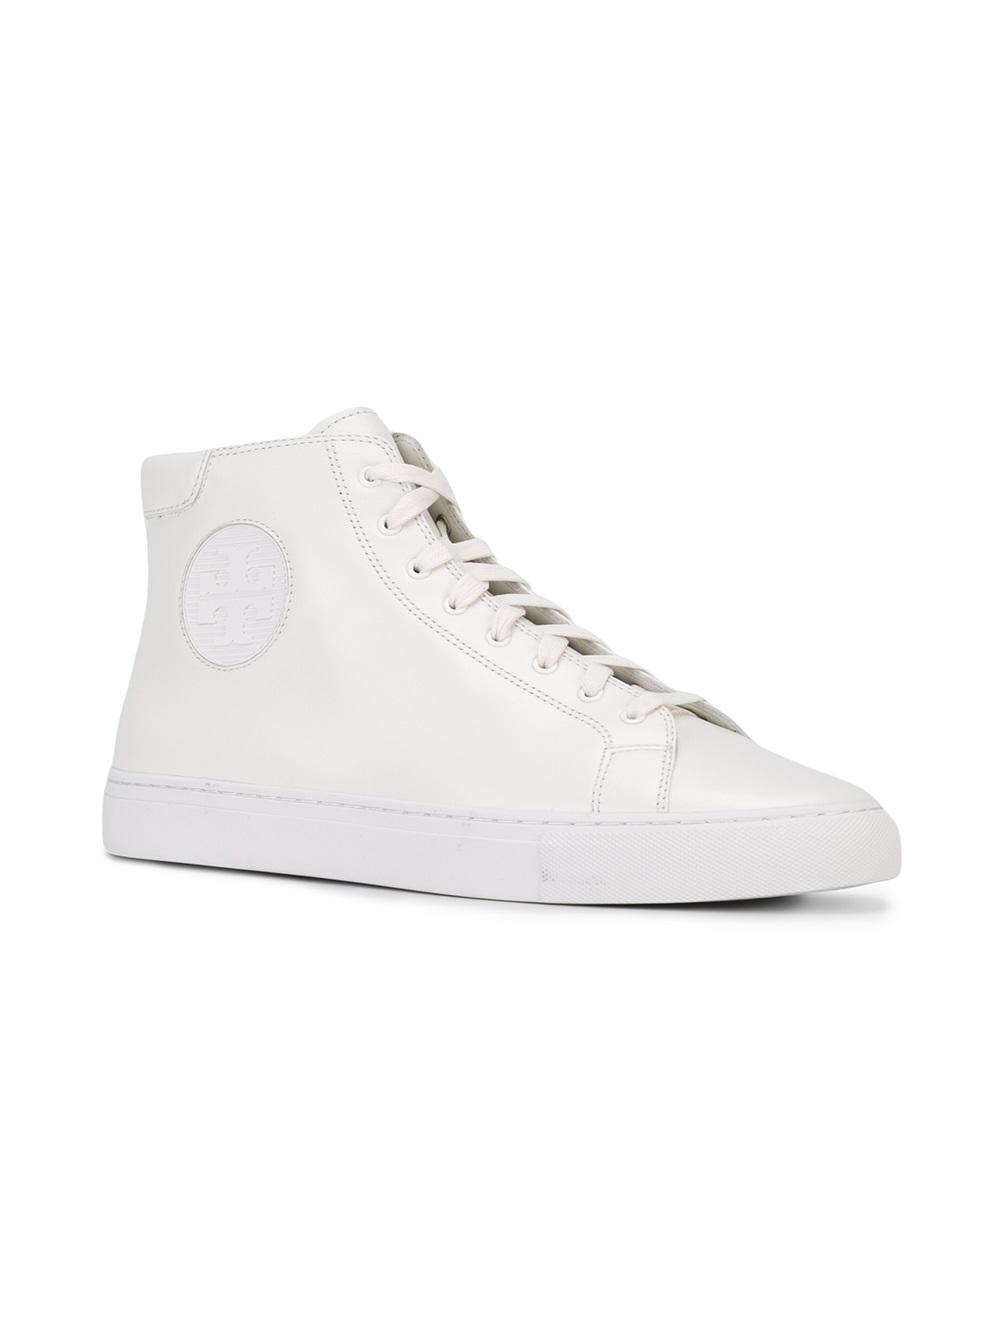 Lyst - Tory Burch 'nola' High-top Sneakers in White